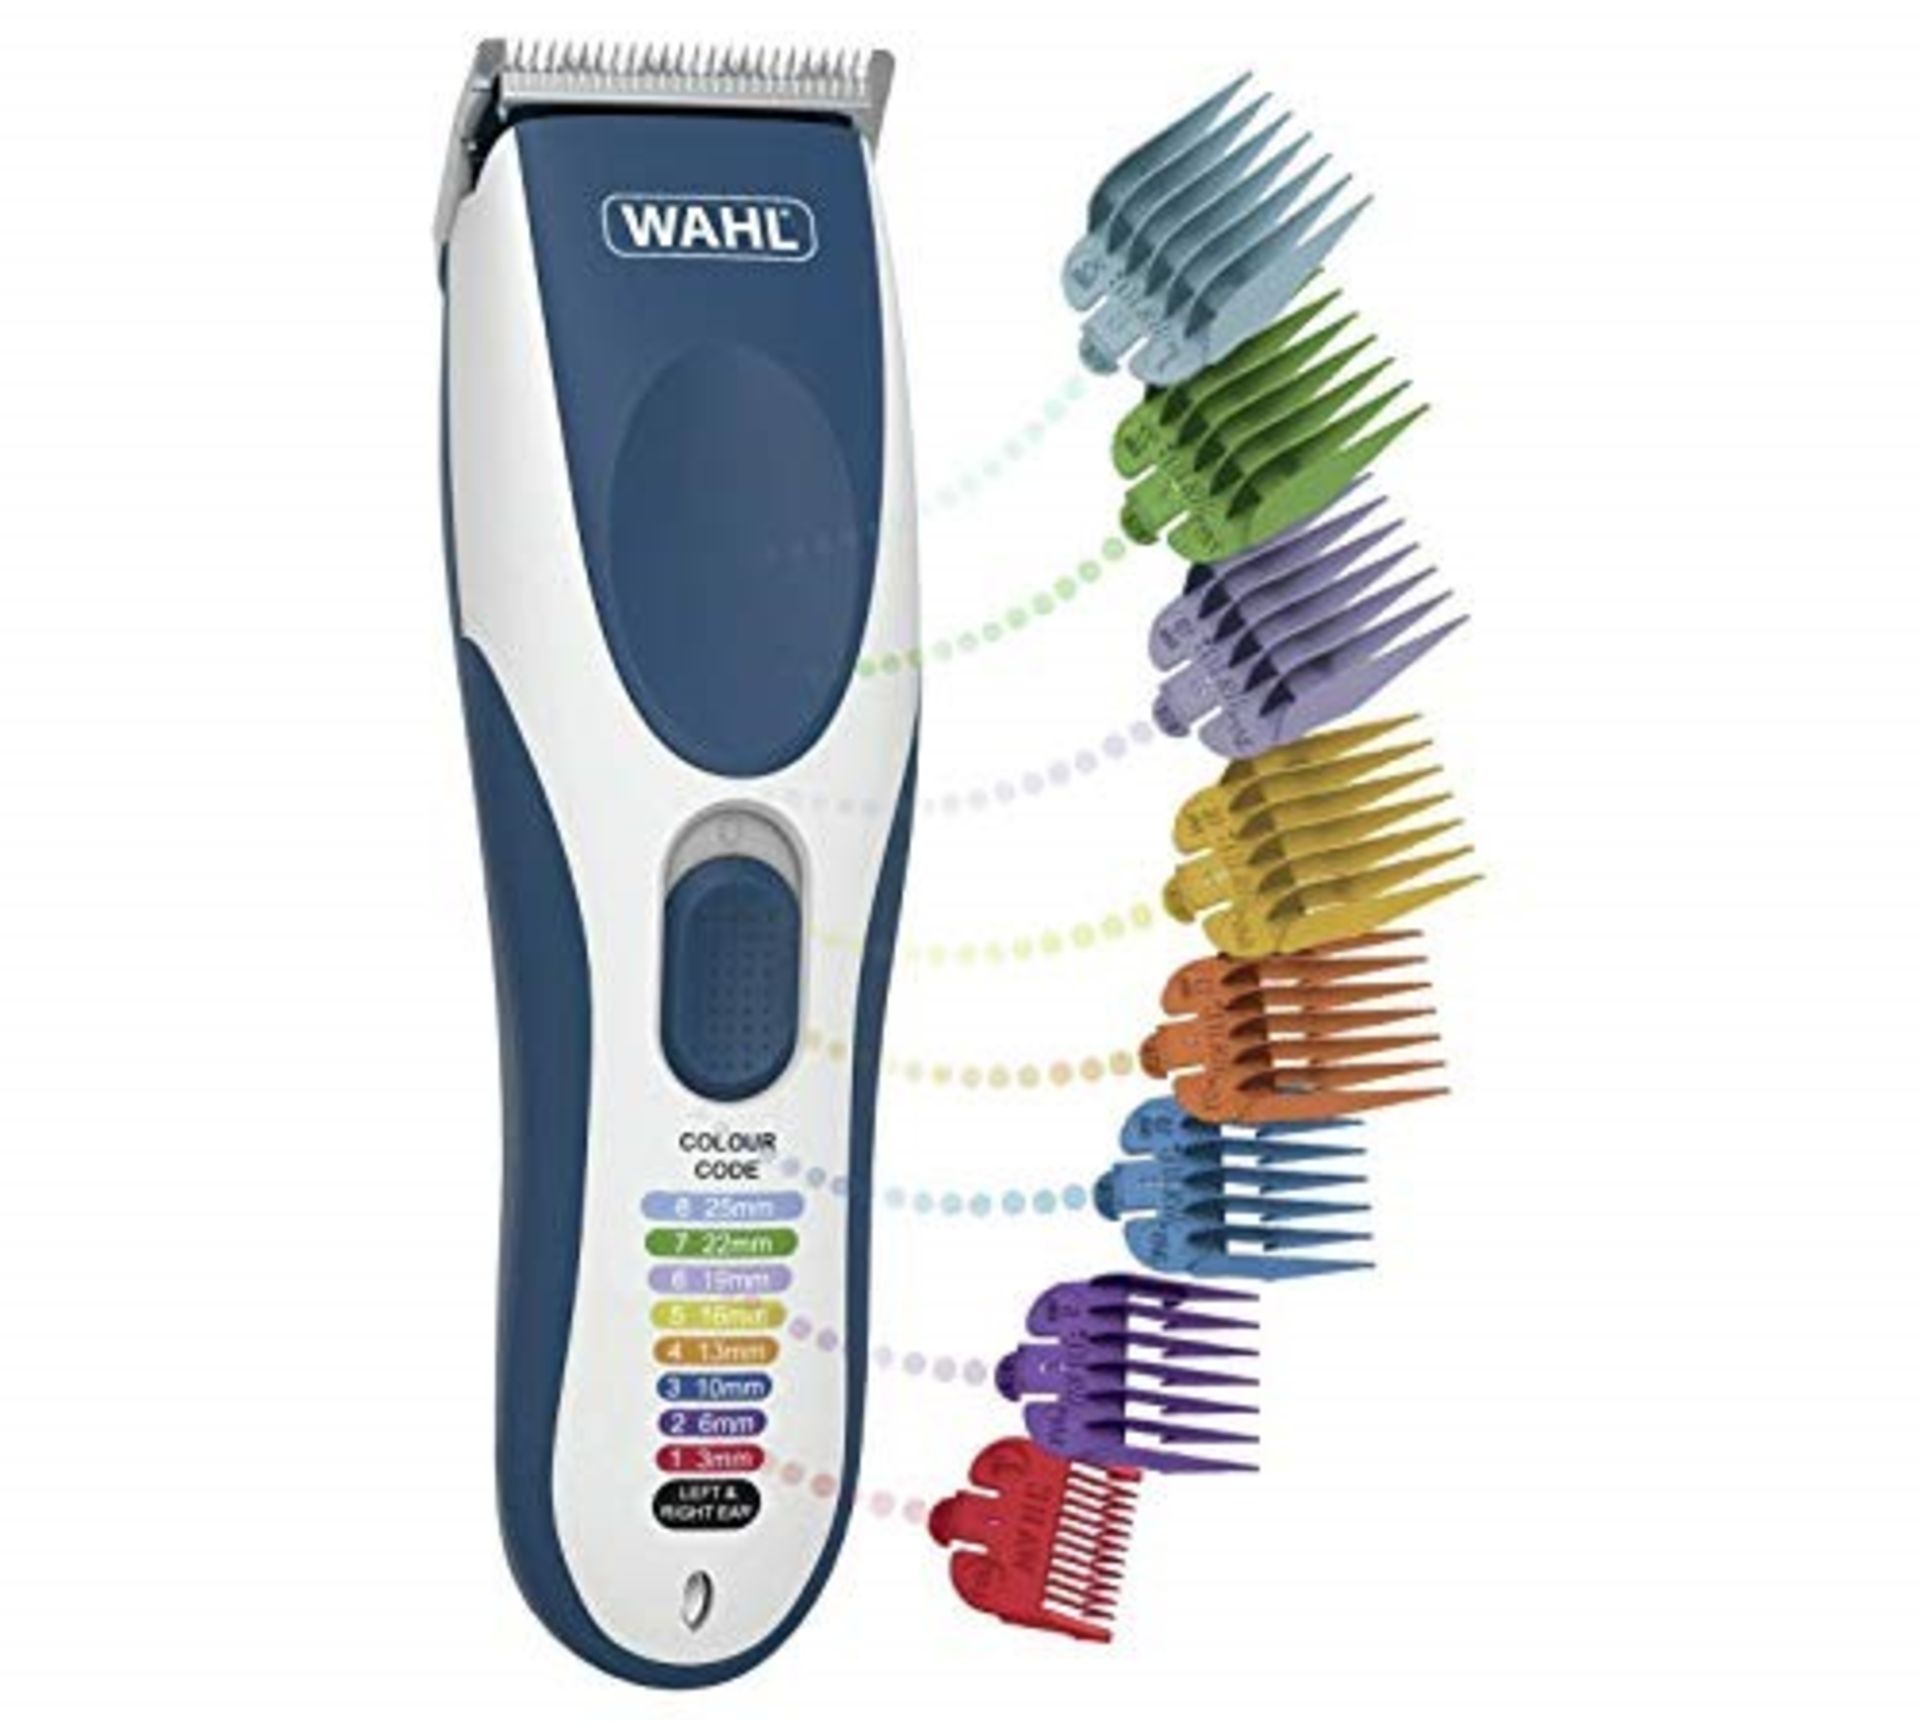 Wahl Hair Clippers for Men, Colour Pro Cordless